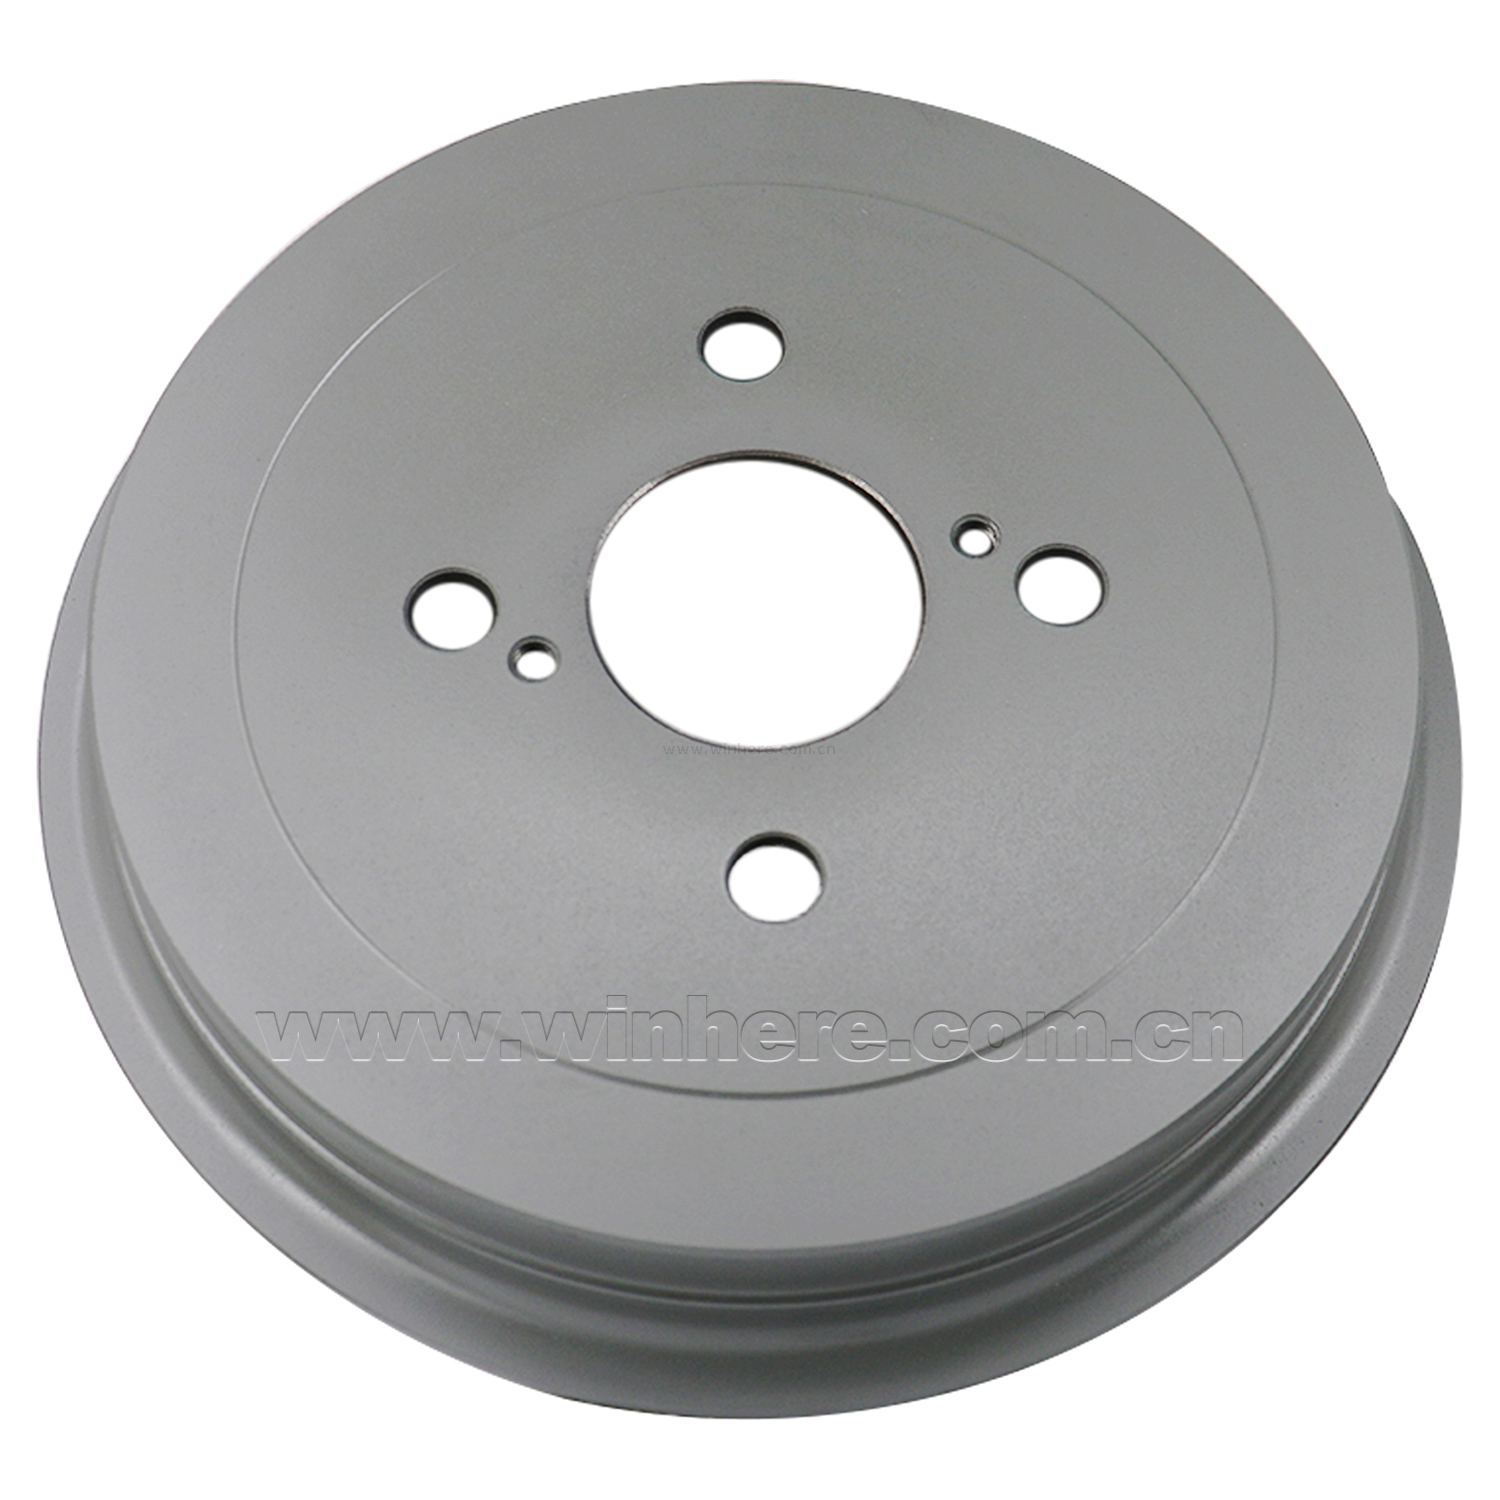 Auto Spare Parts Rear Brake Drum for OE#4243152070 from China manufacturer  - Winhere